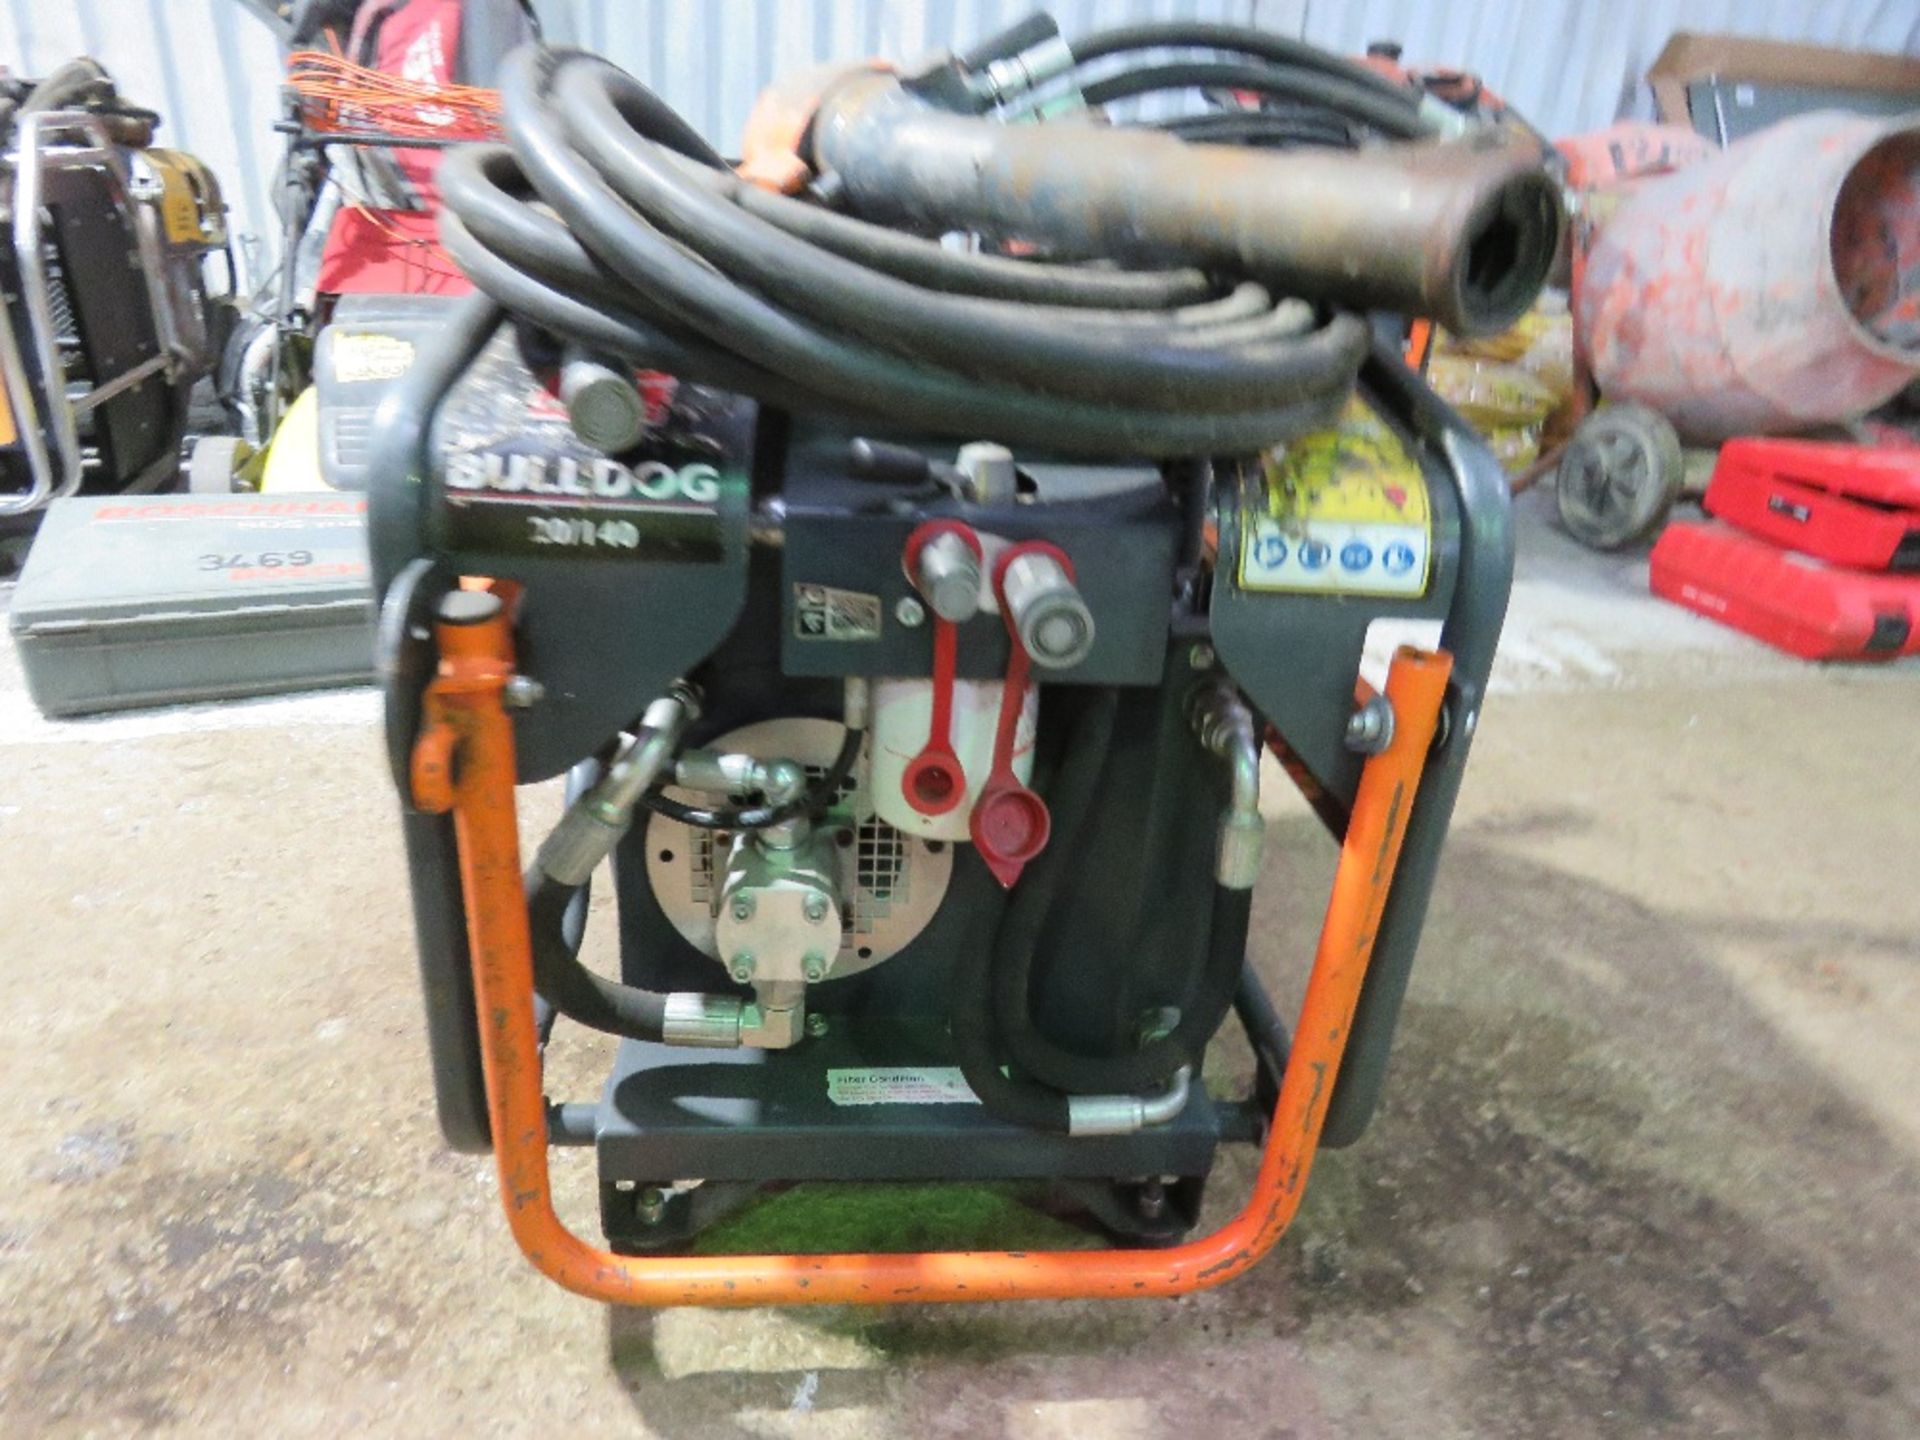 BELLE BULLDOG 20/140 PETROL ENGINED HYDRAULIC BREAKER PACK WITH HOSE AND GUN. - Image 2 of 4